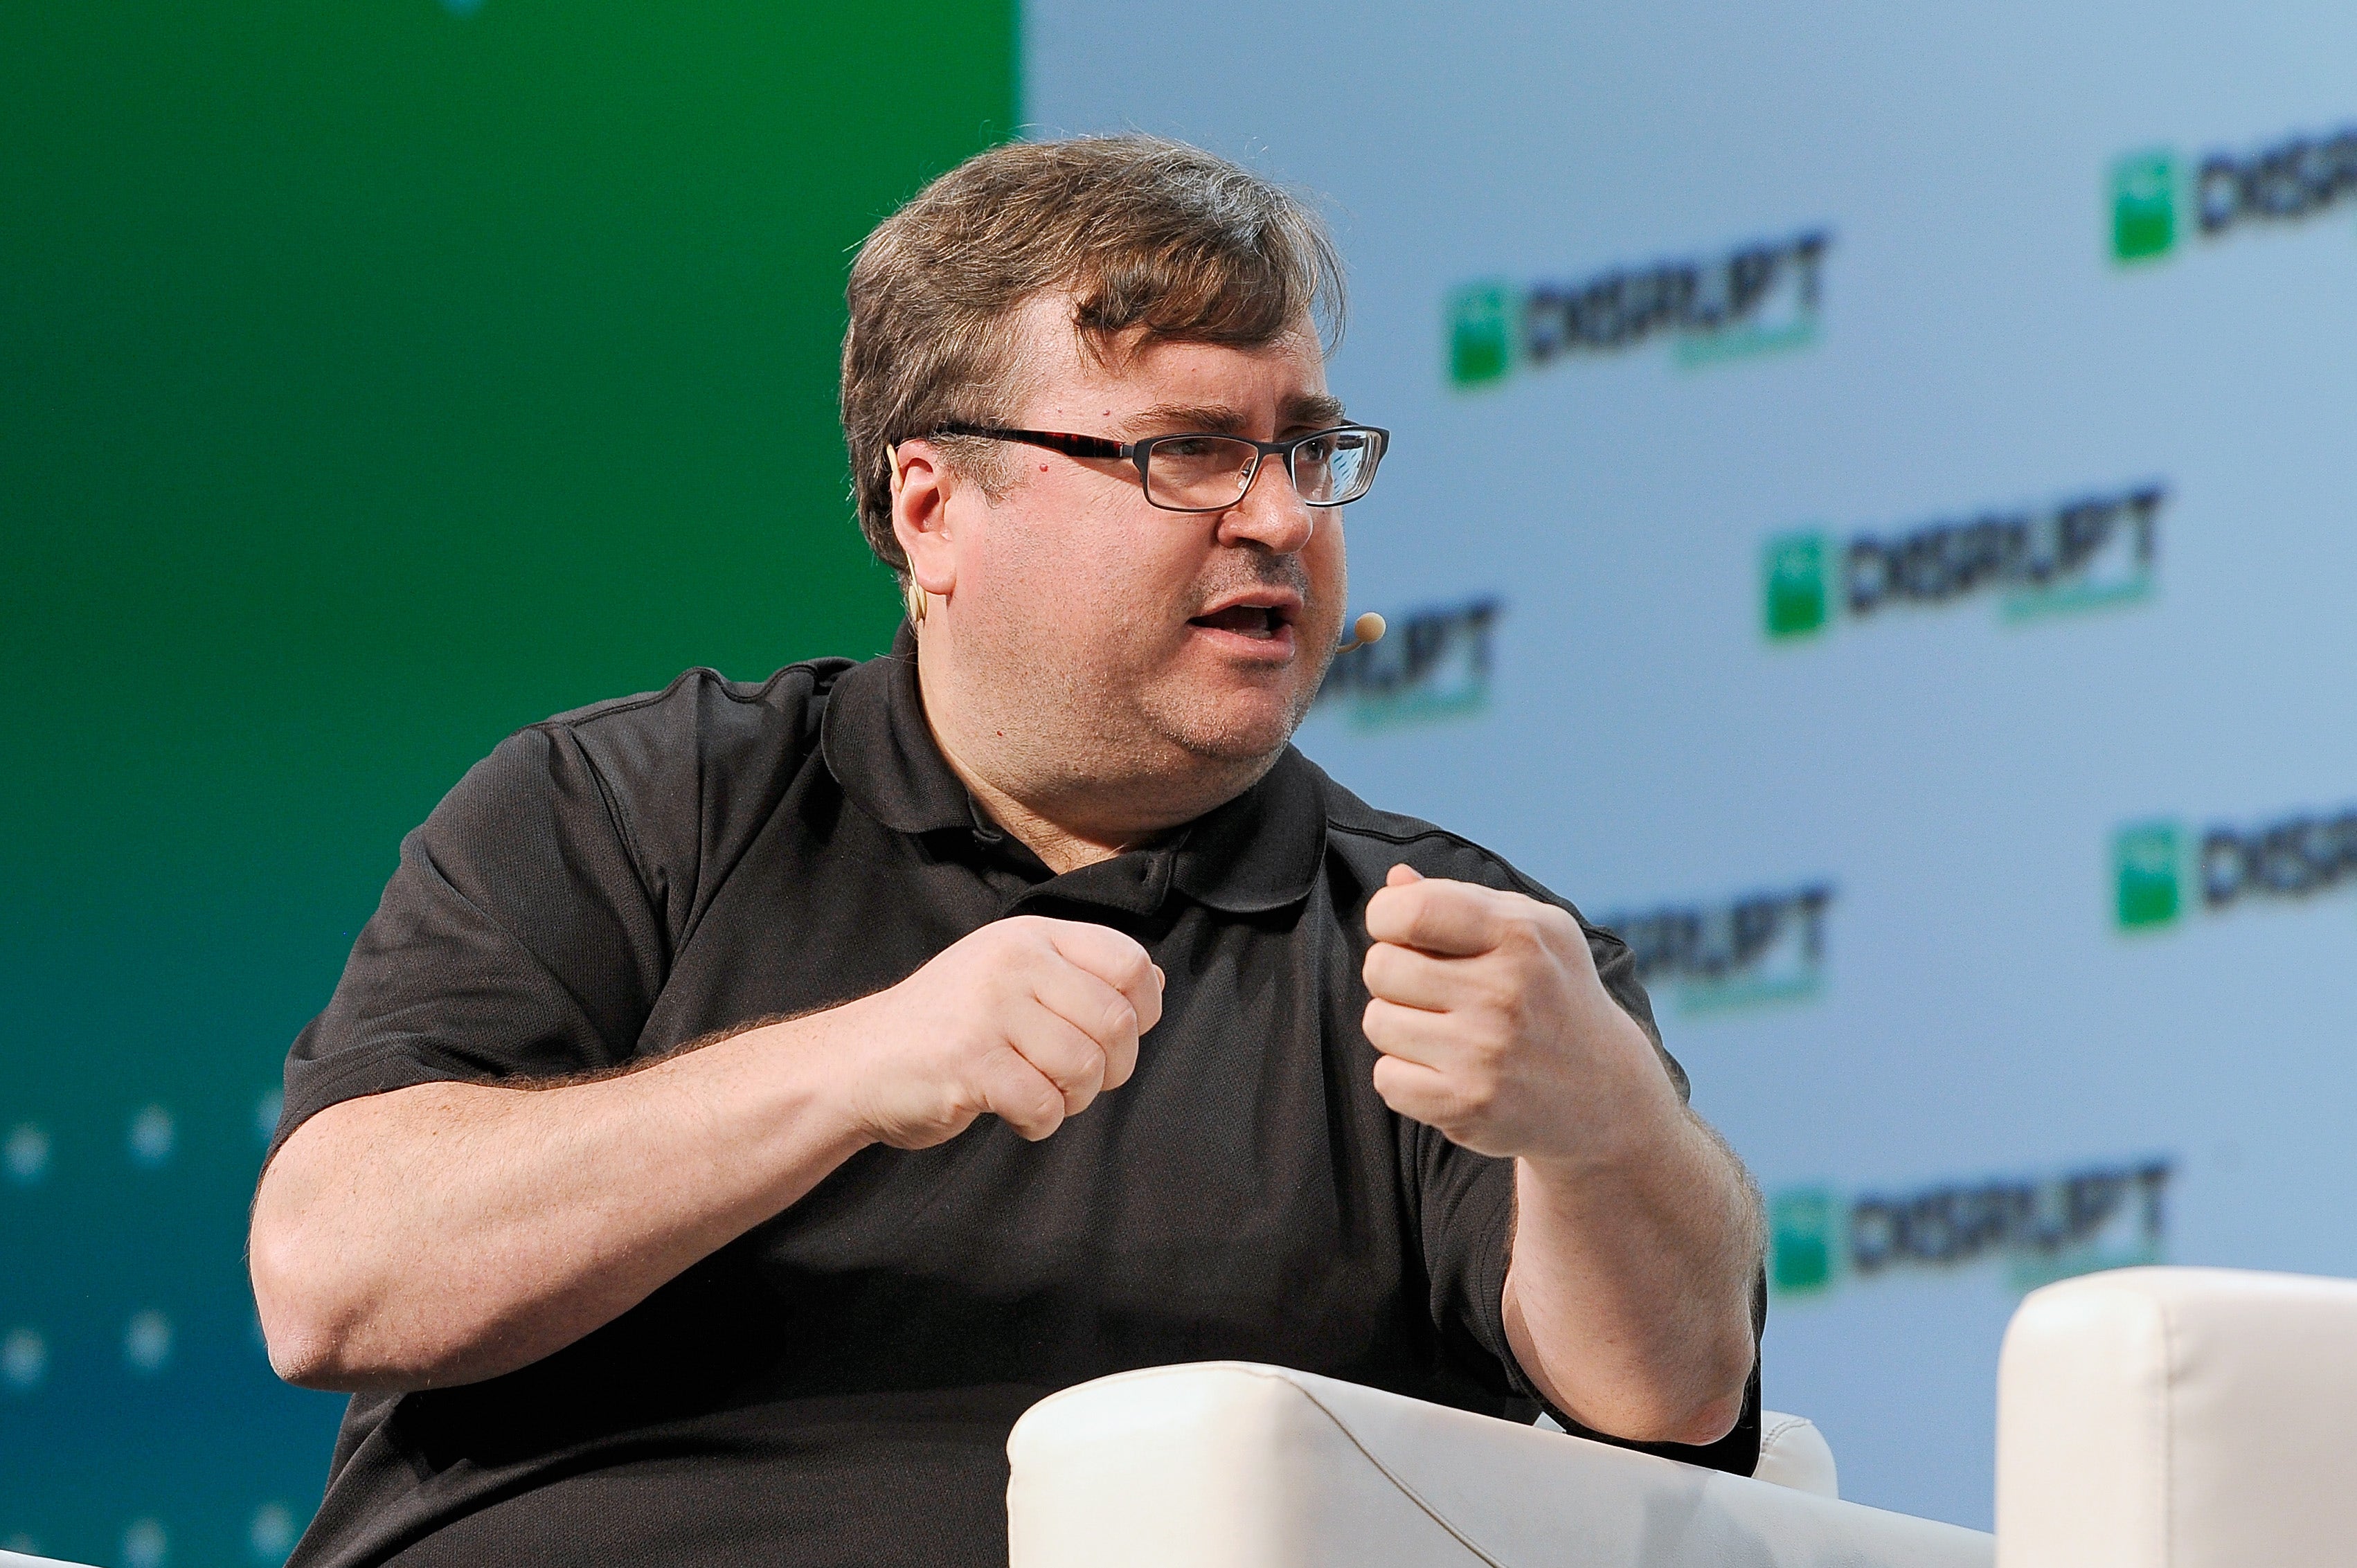 Reid Hoffman, a founder and former executive chairman of LinkedIn, at Moscone Center on Sept. 6, 2018 in San Francisco, Calif.